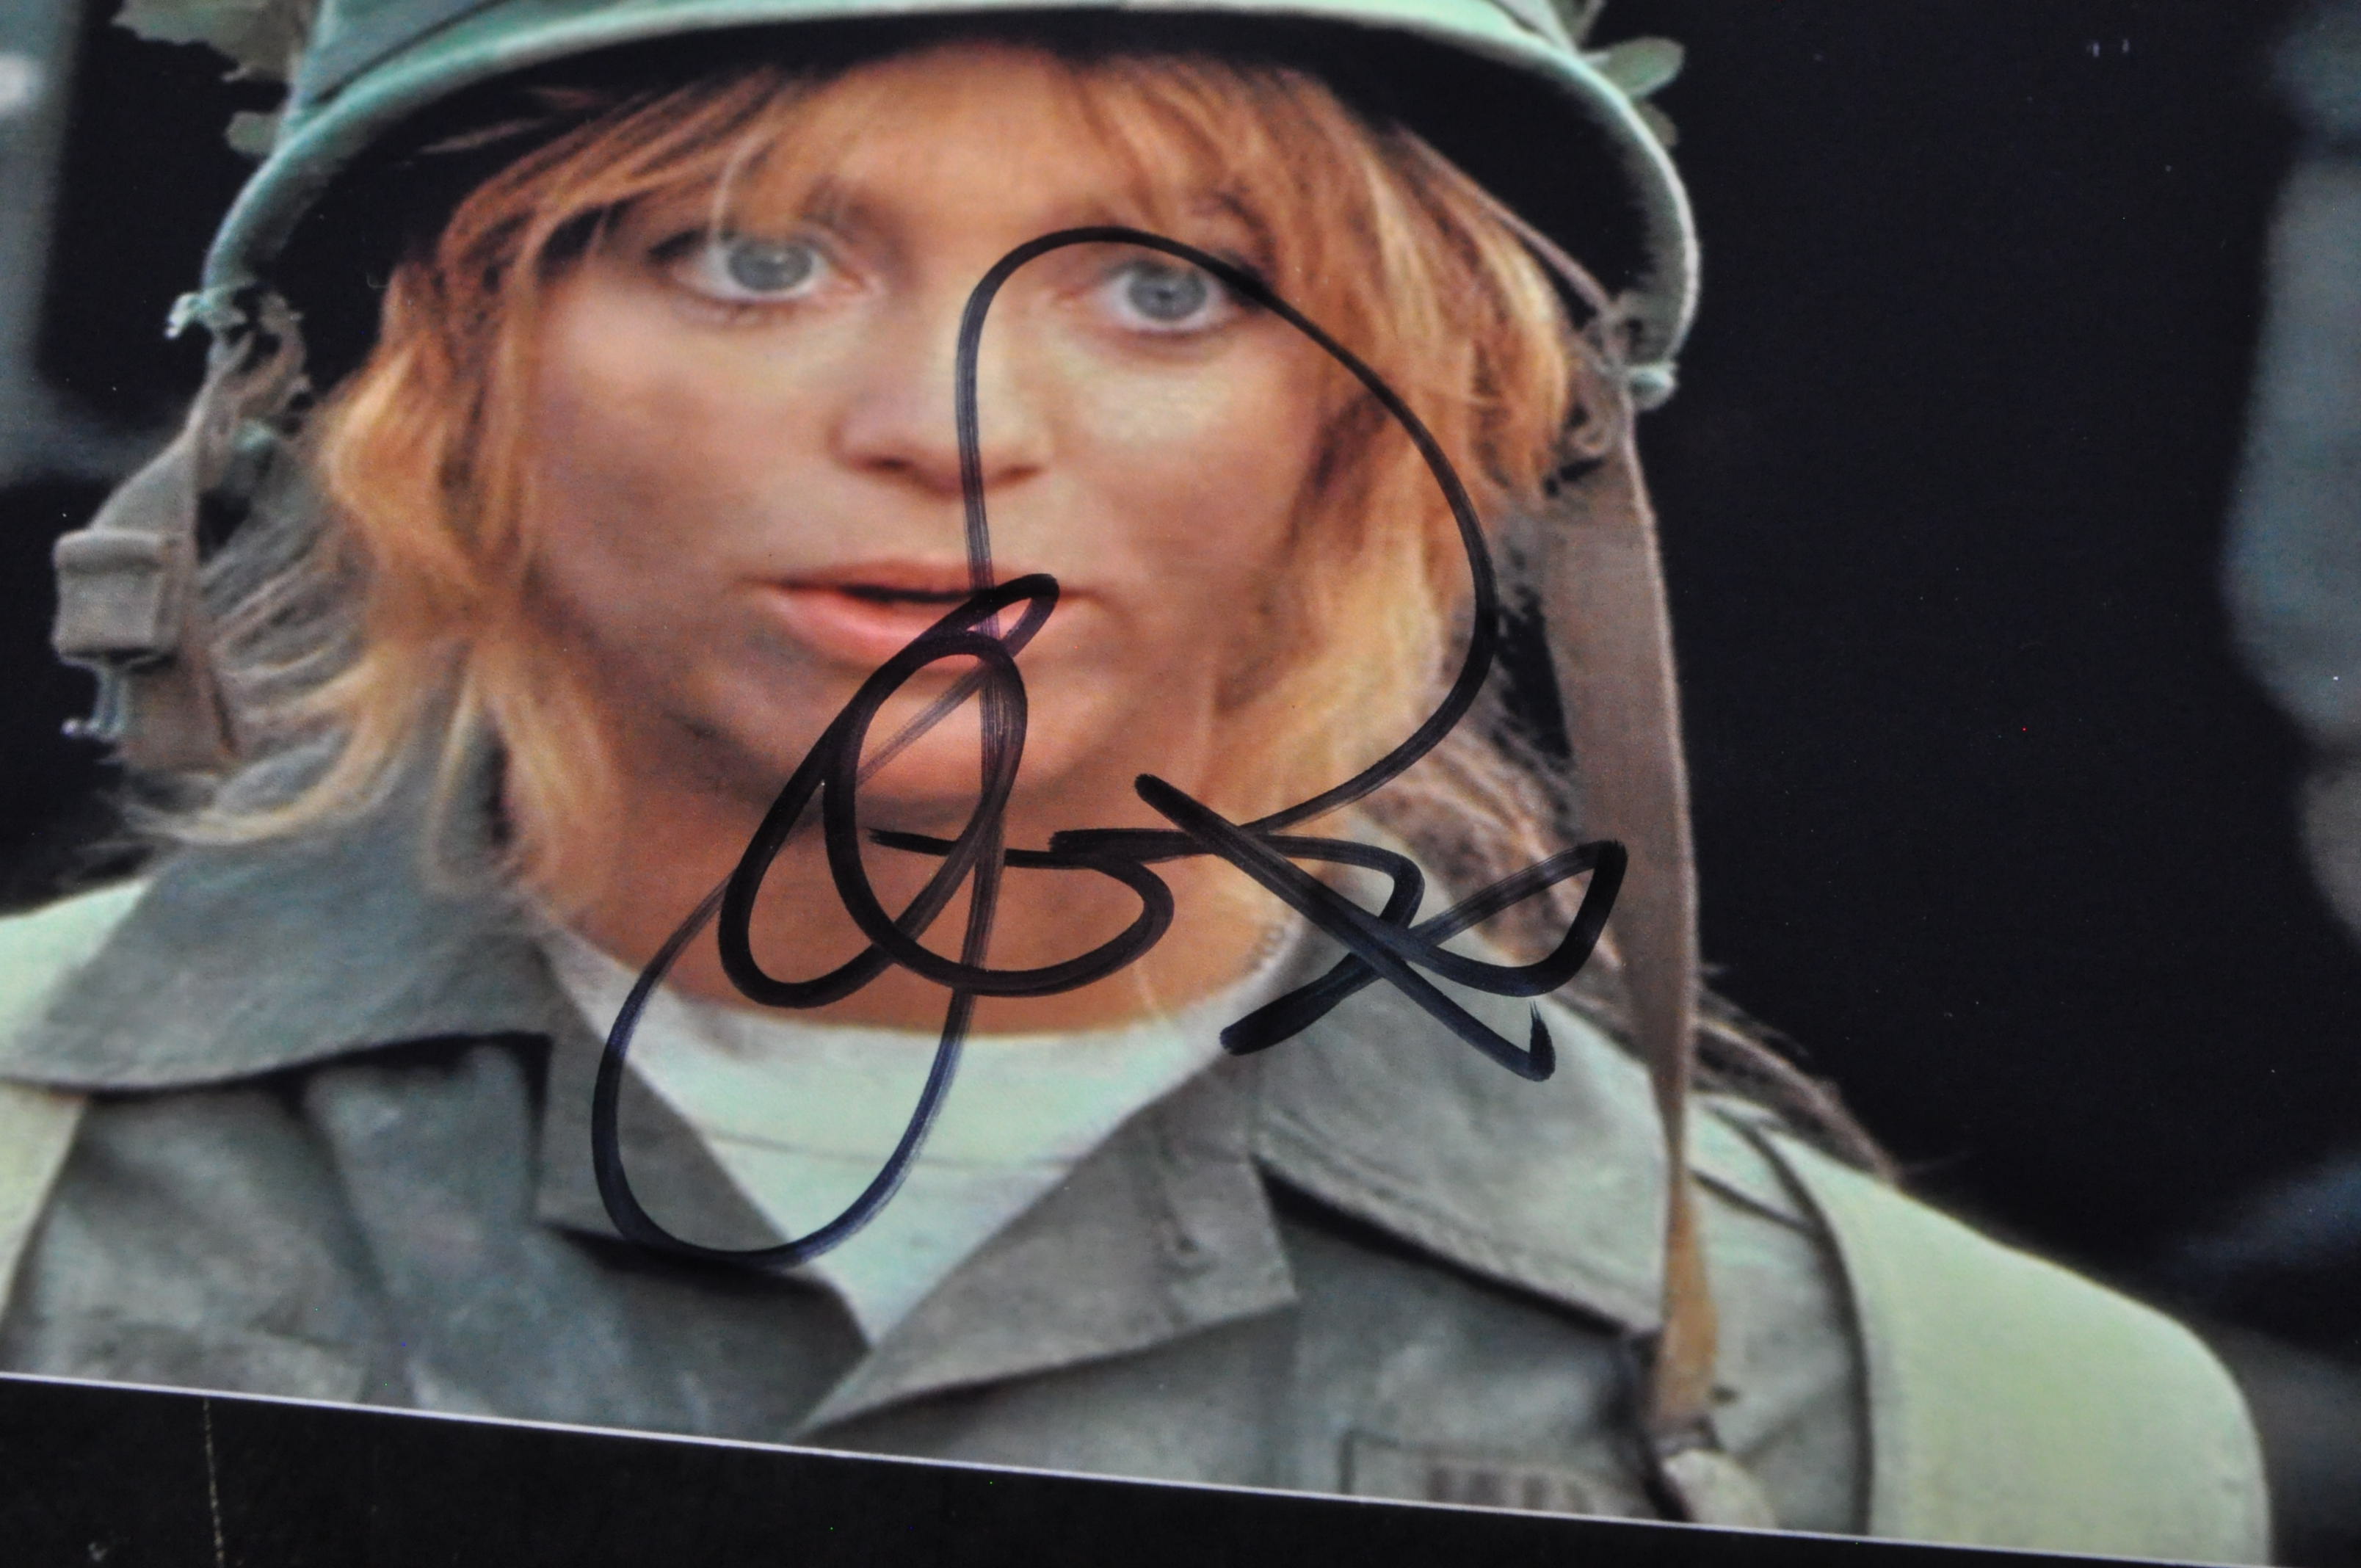 GOLDIE HAWN - PRIVATE BENJAMIN - AUTOGRAPHED 8X10" PHOTO - ACOA - Image 2 of 2